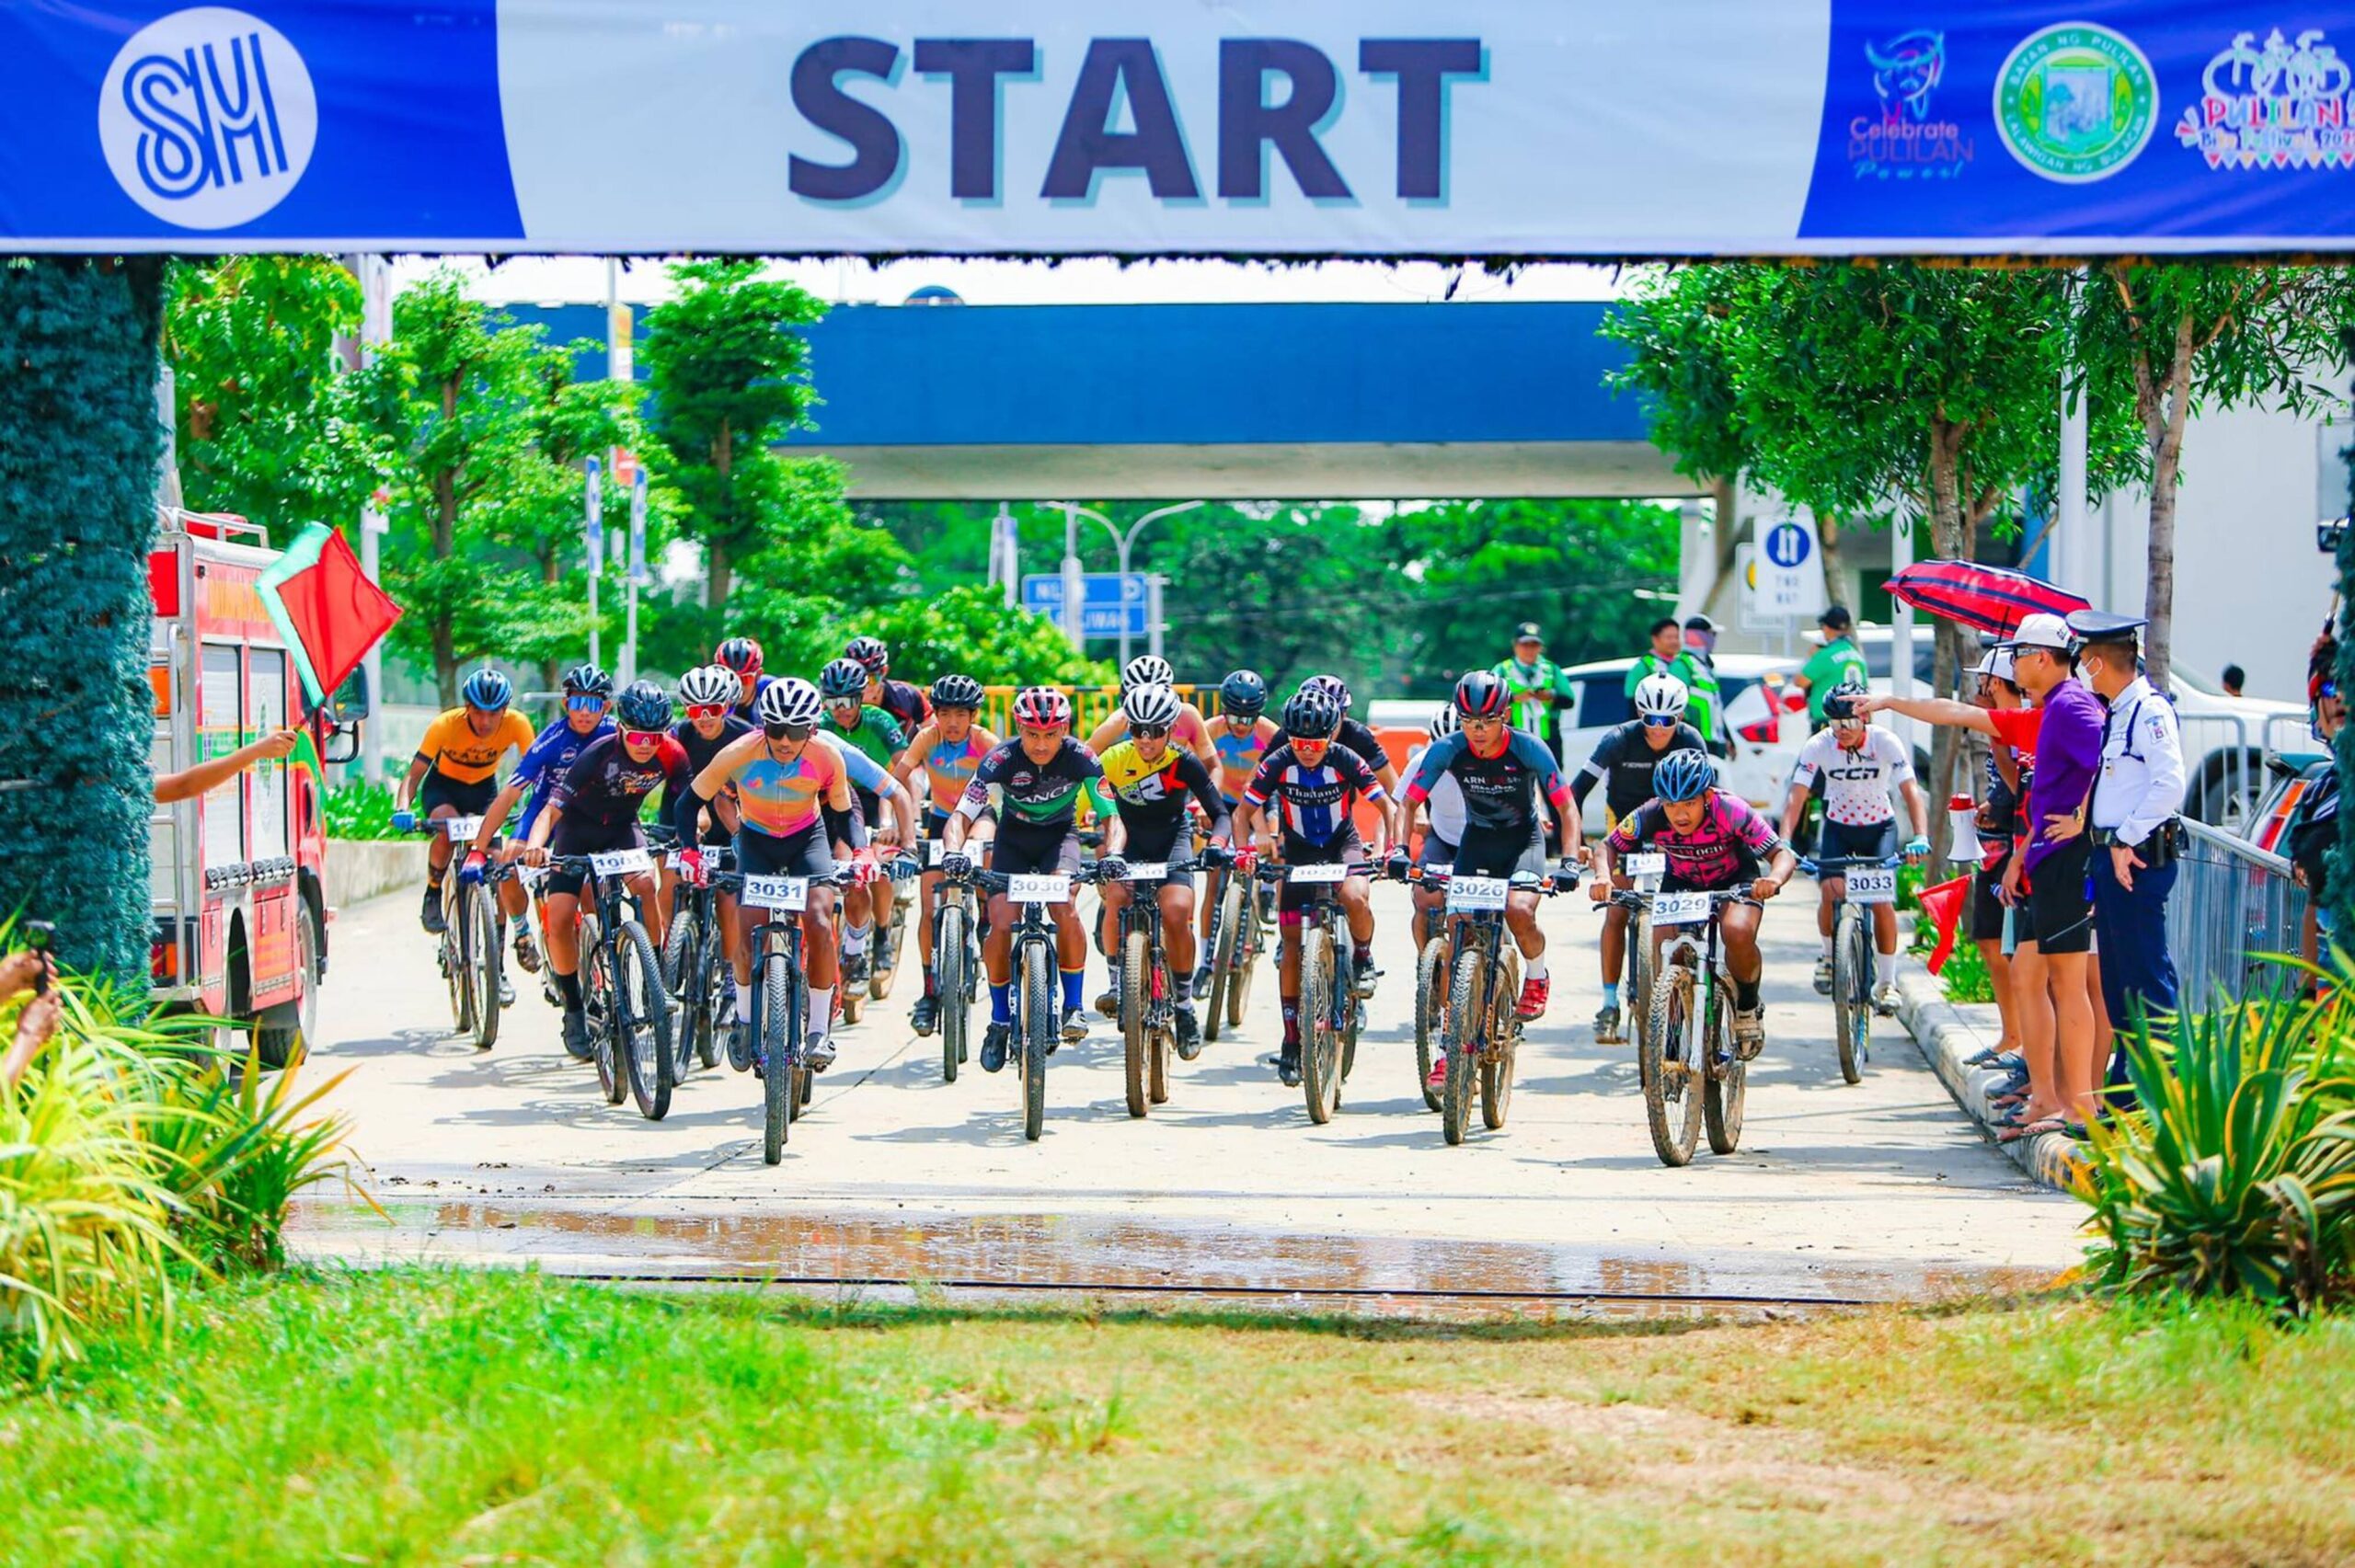 PULILAN BIKE FEST FEATURING XC RACE COMPETITION AT SM Core Bulacan